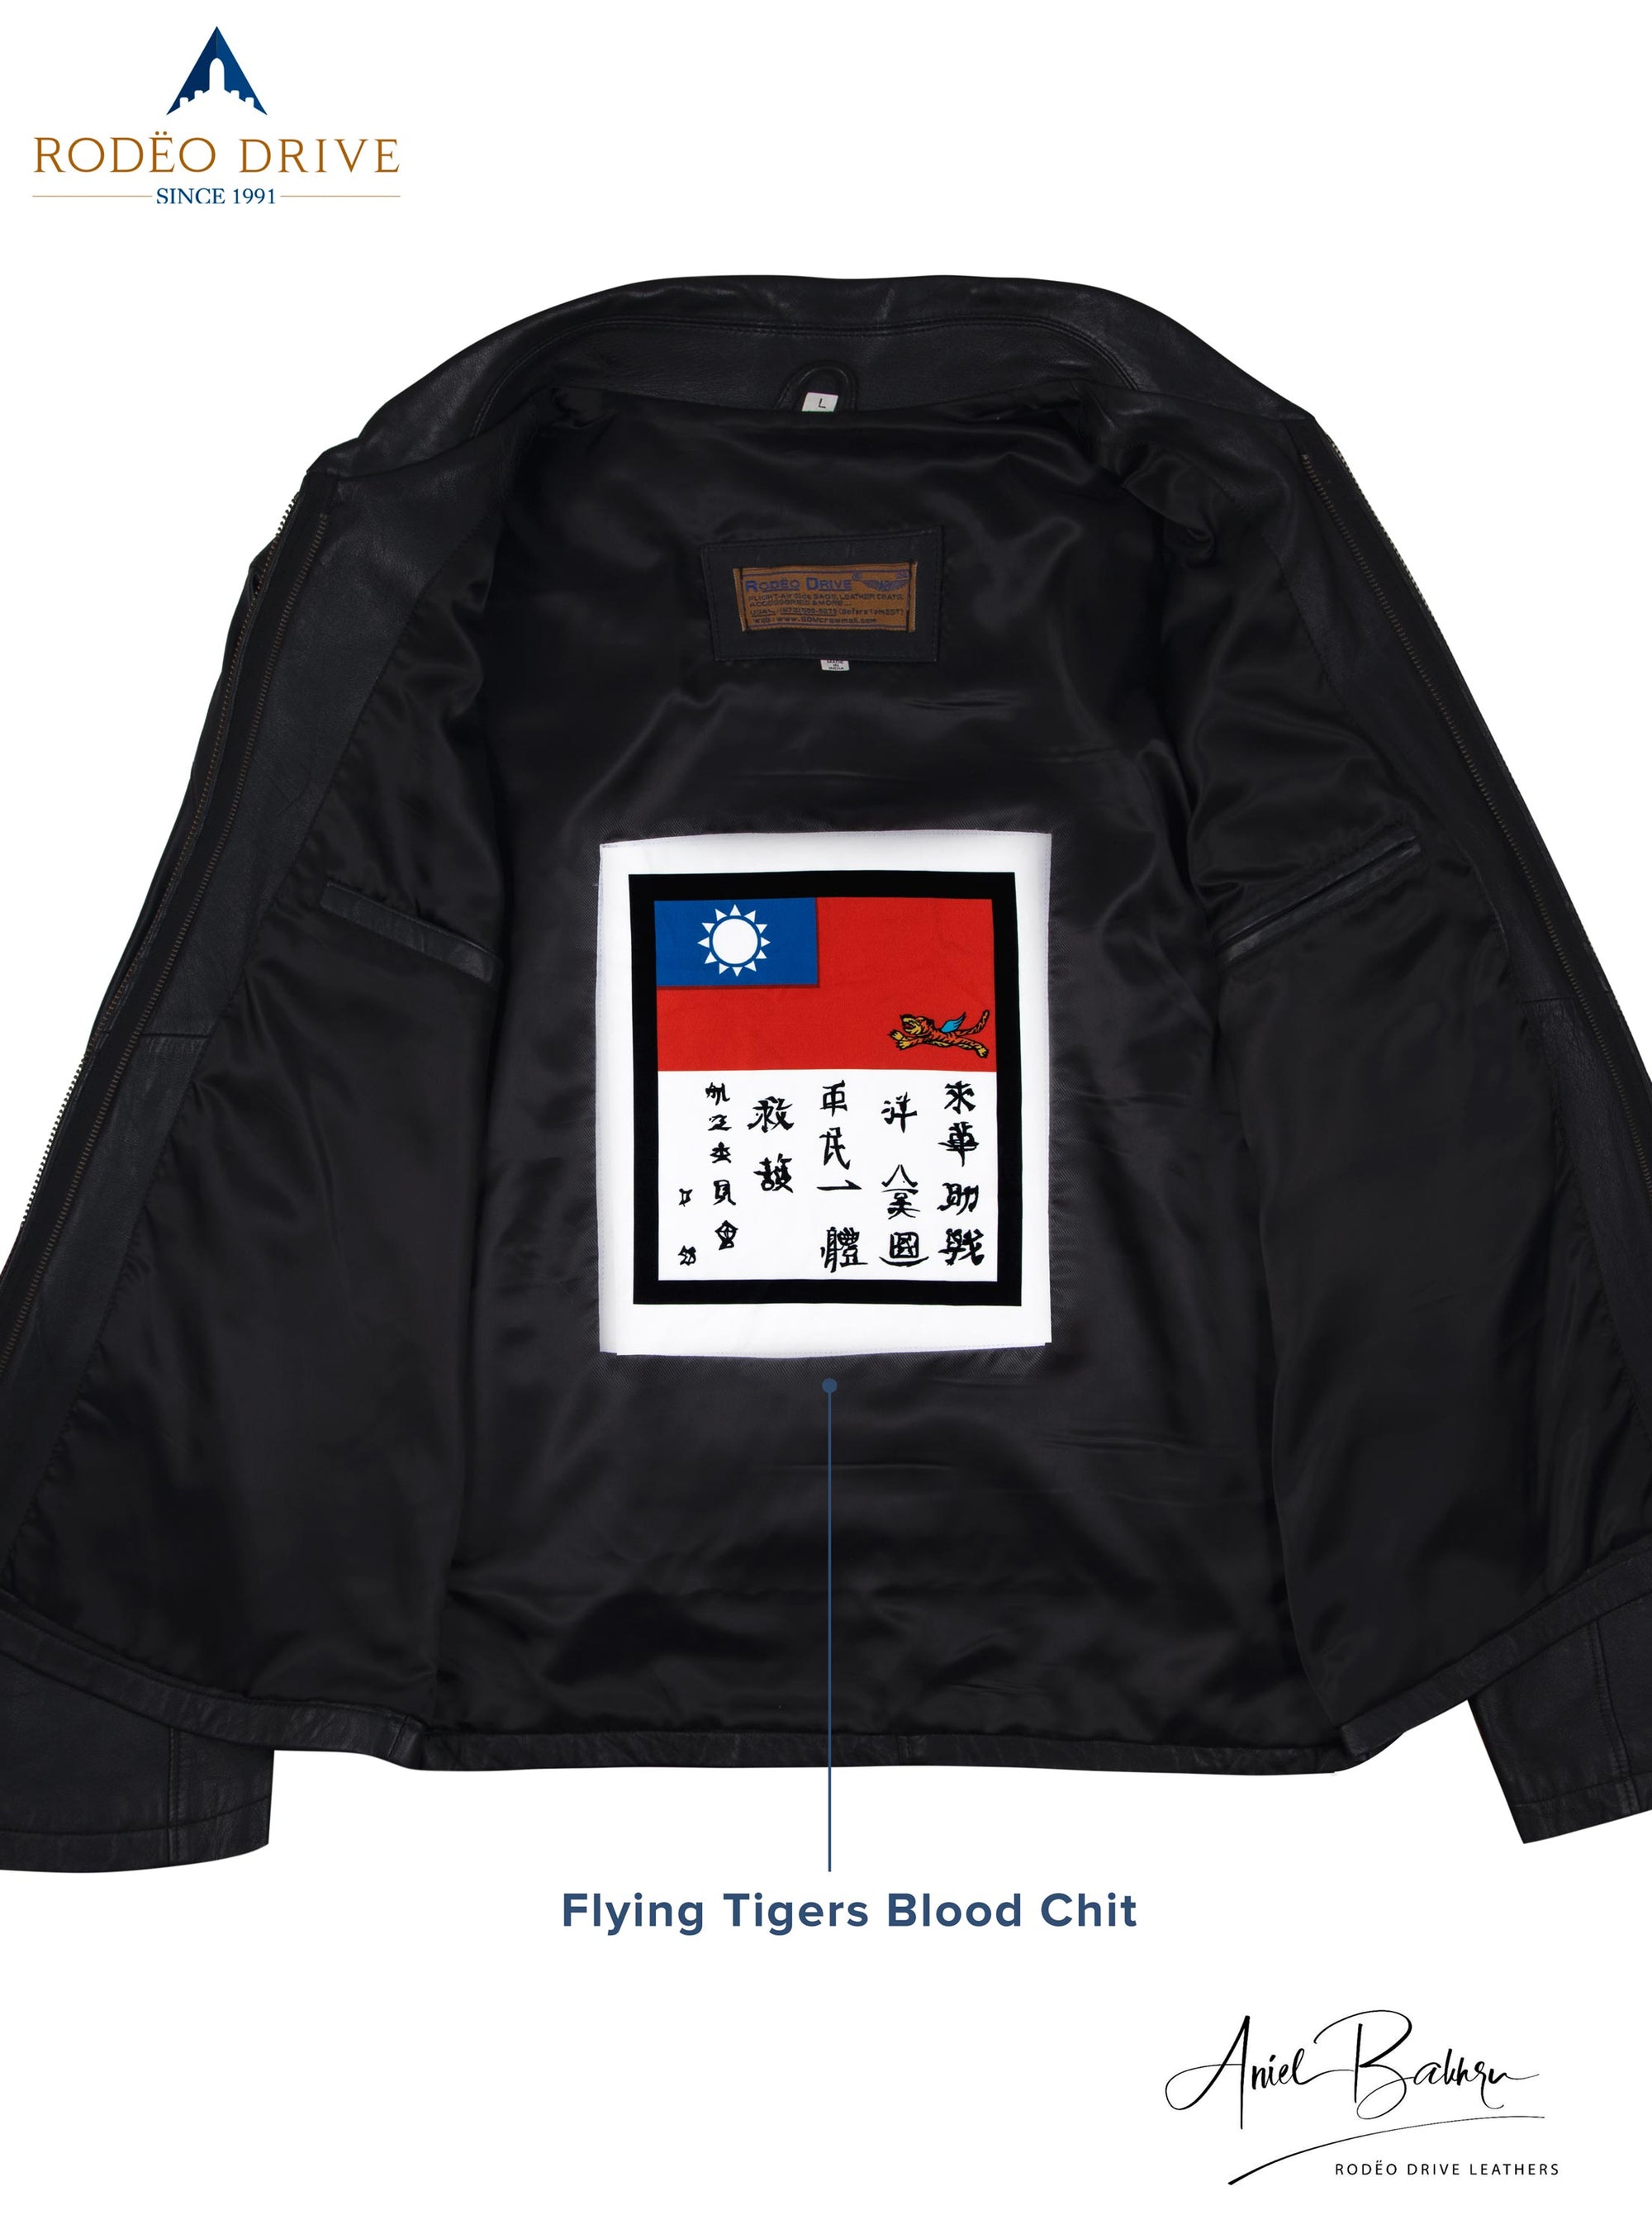 inside image of black leather jacket. A flying Tigers Blood chit is sewed inside it